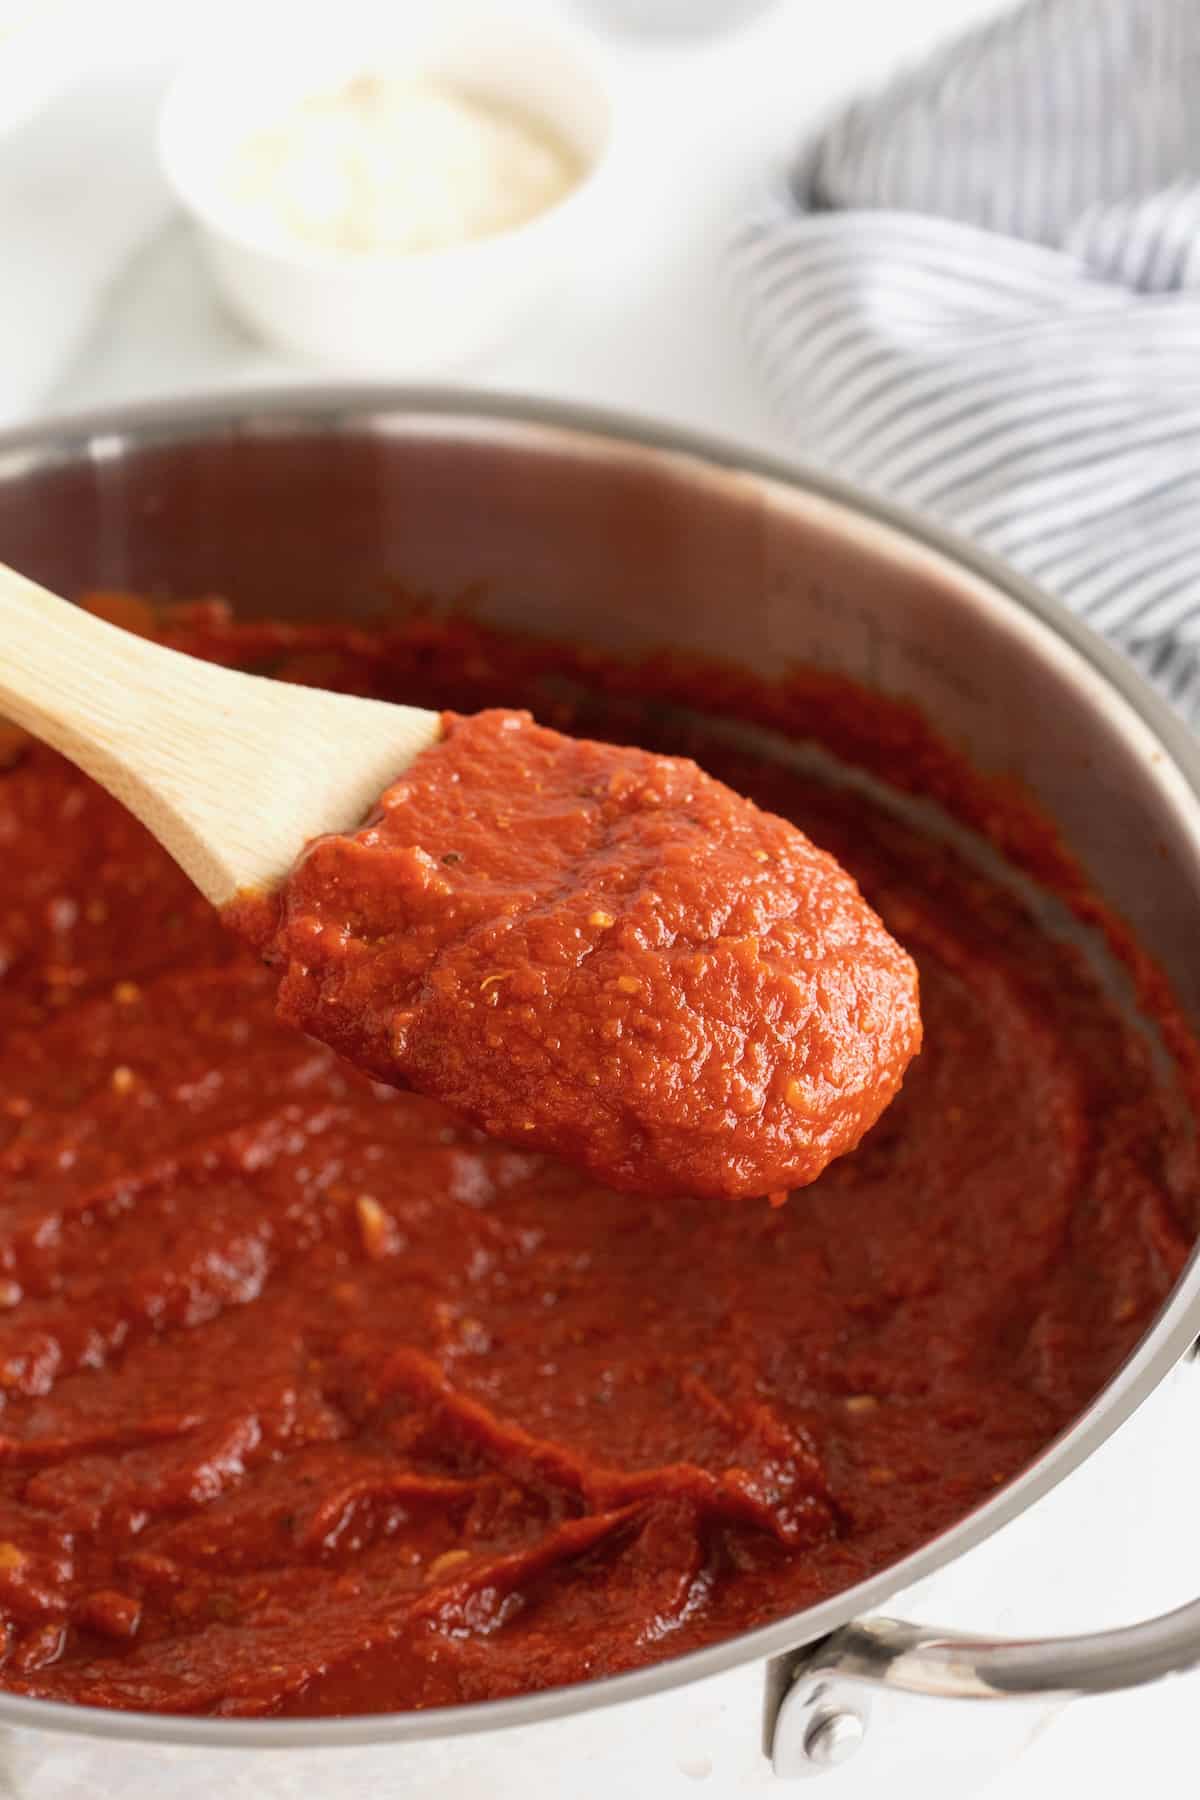 A large pot with red marinara sauce in it. A wooden spoon with a white handle is sticking out of the pot.